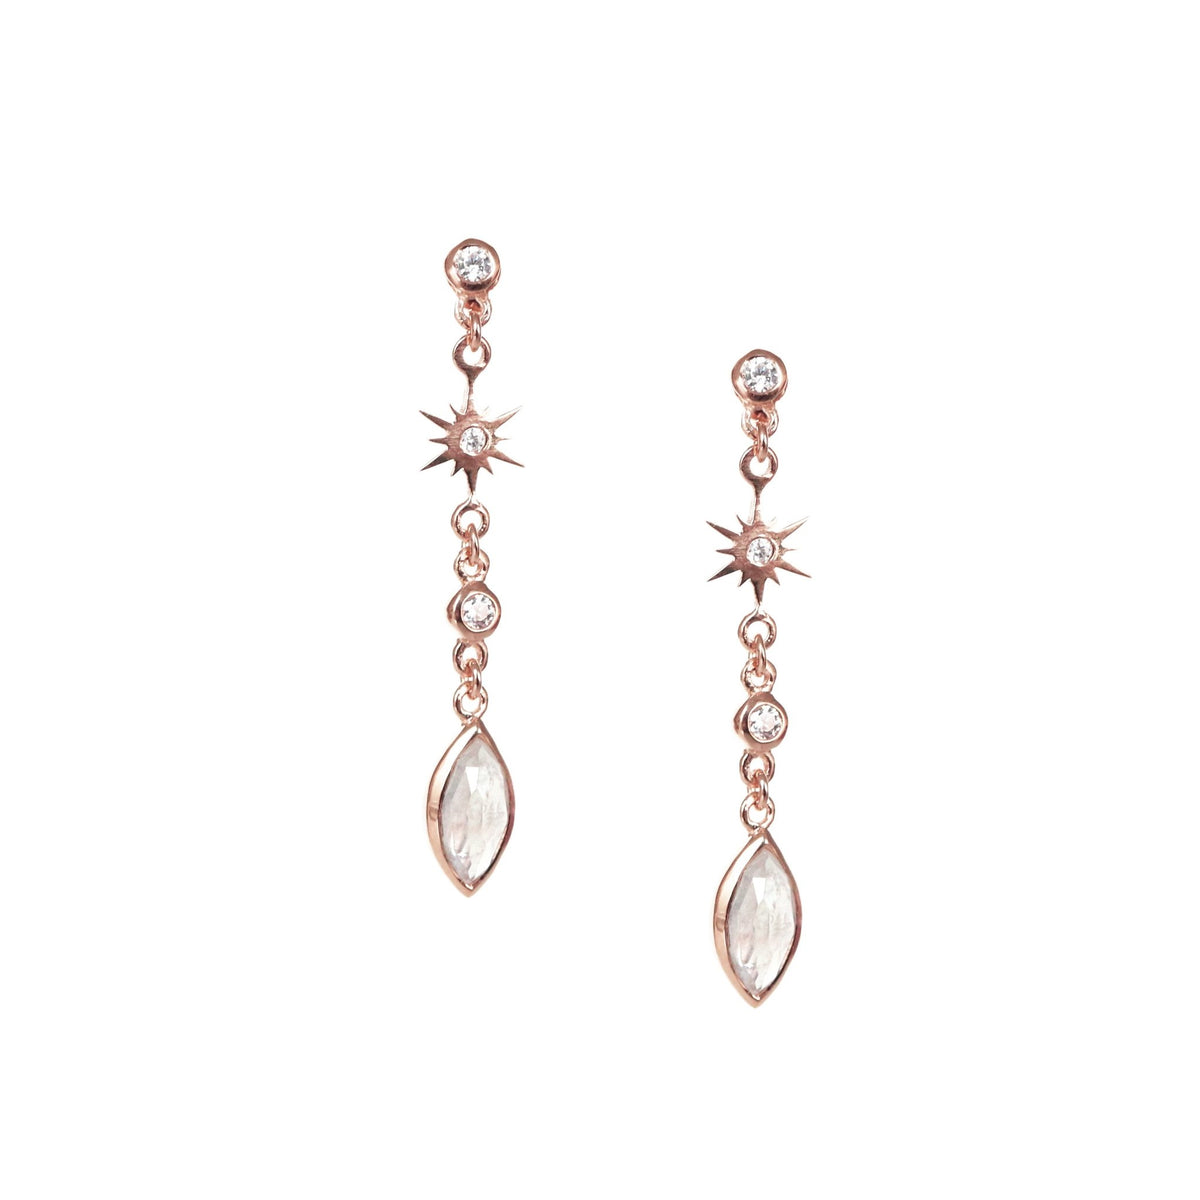 TINY BELIEVE MARQUISE DROP EARRINGS - CUBIC ZIRCONIA, MOONSTONE &amp; ROSE GOLD - SO PRETTY CARA COTTER